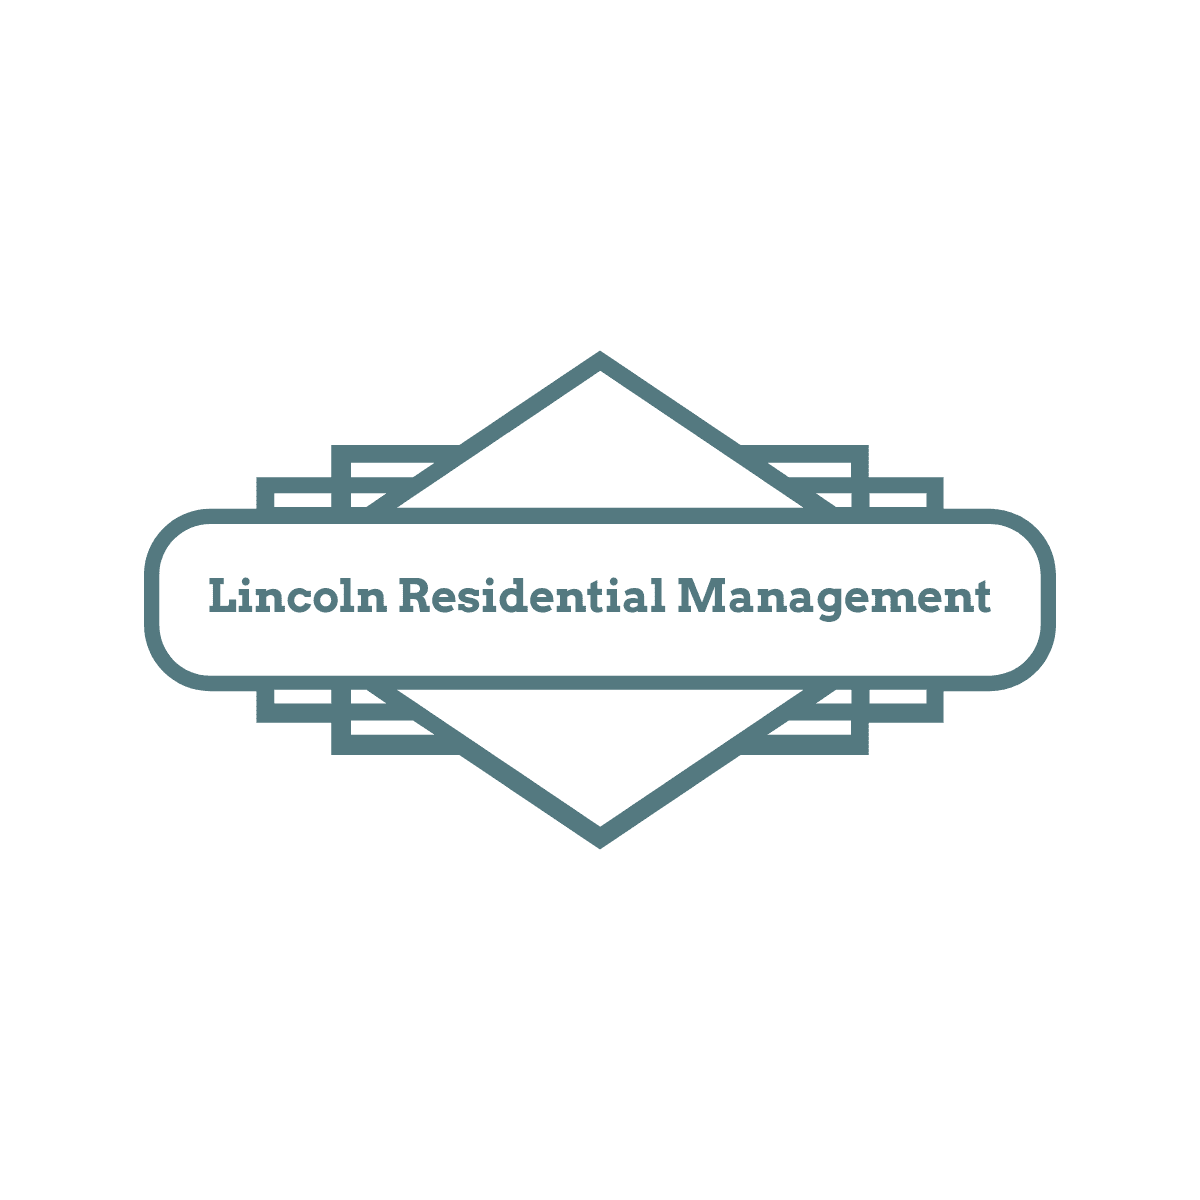 Lincoln Residential Management